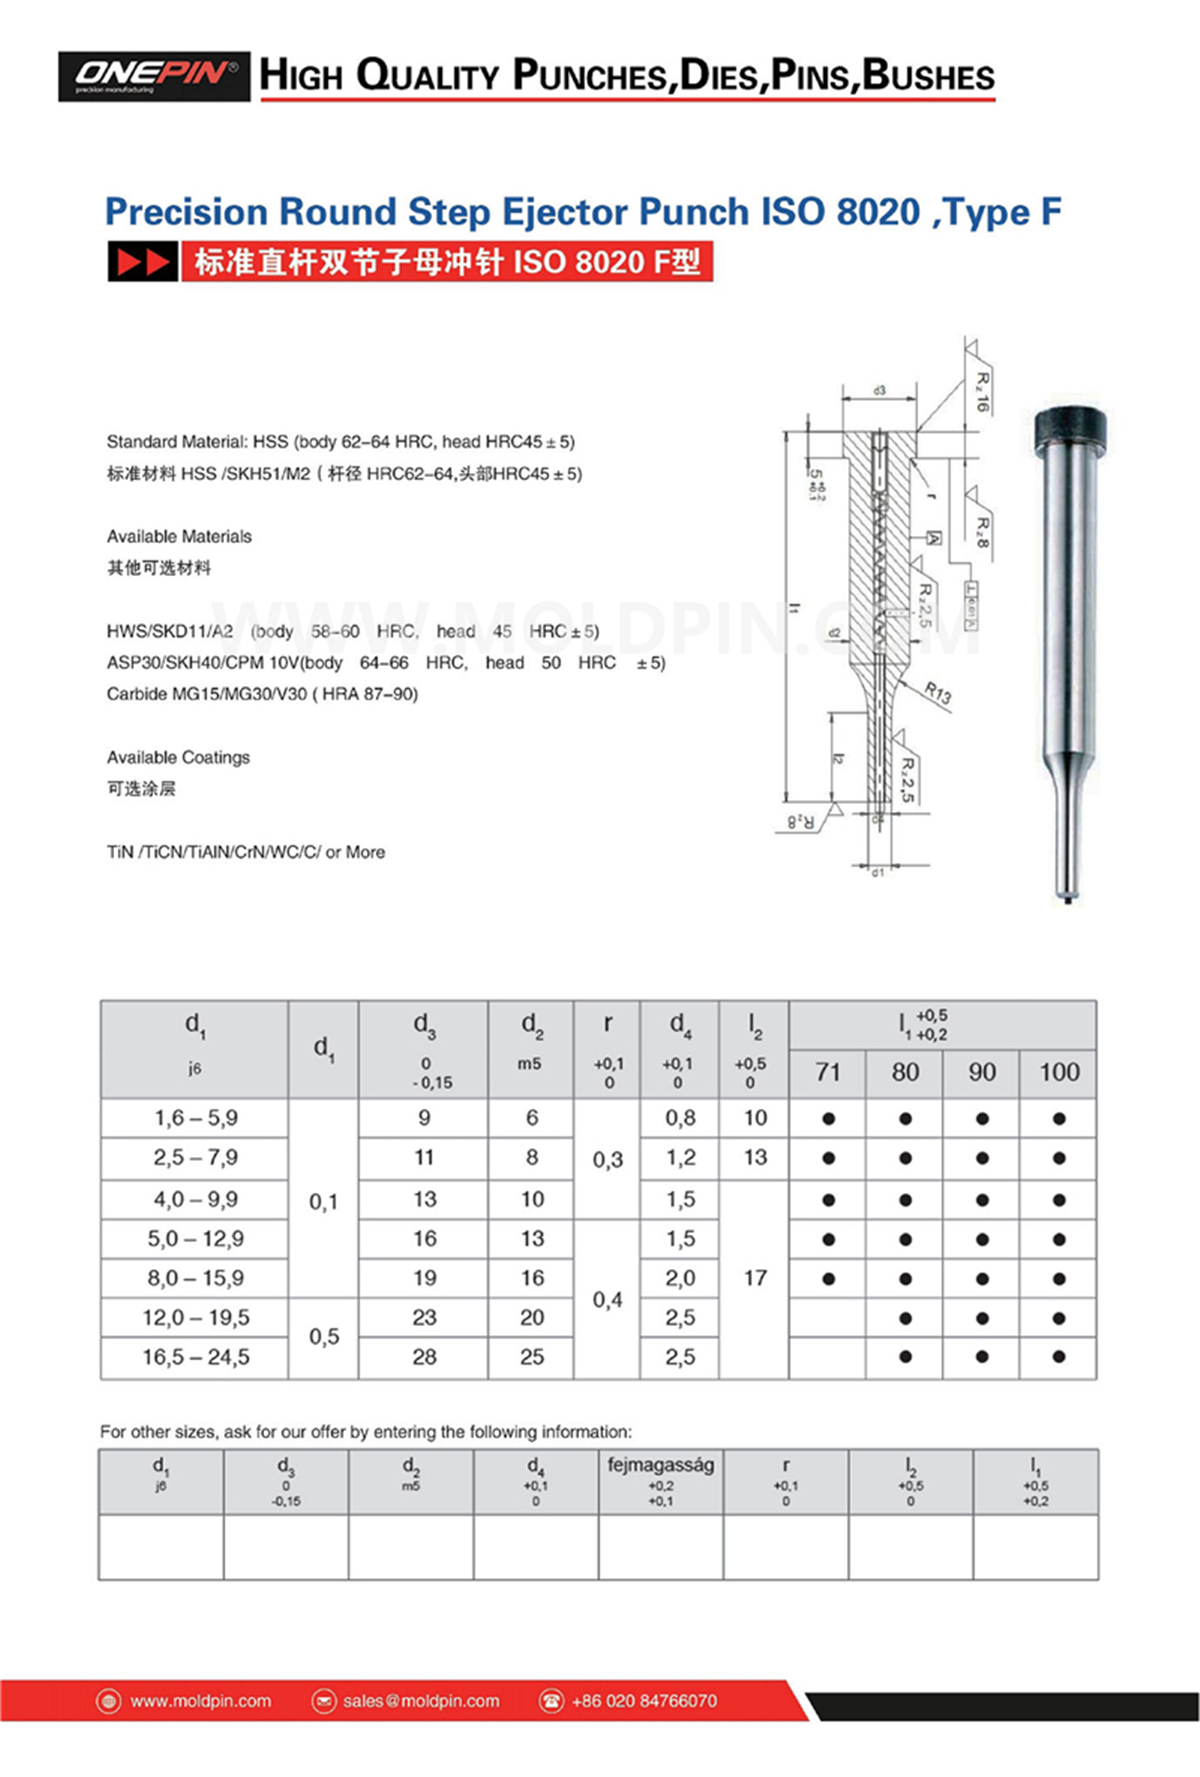 Precision Round Step Ejector Punch ISO 8020,Type F.jpg